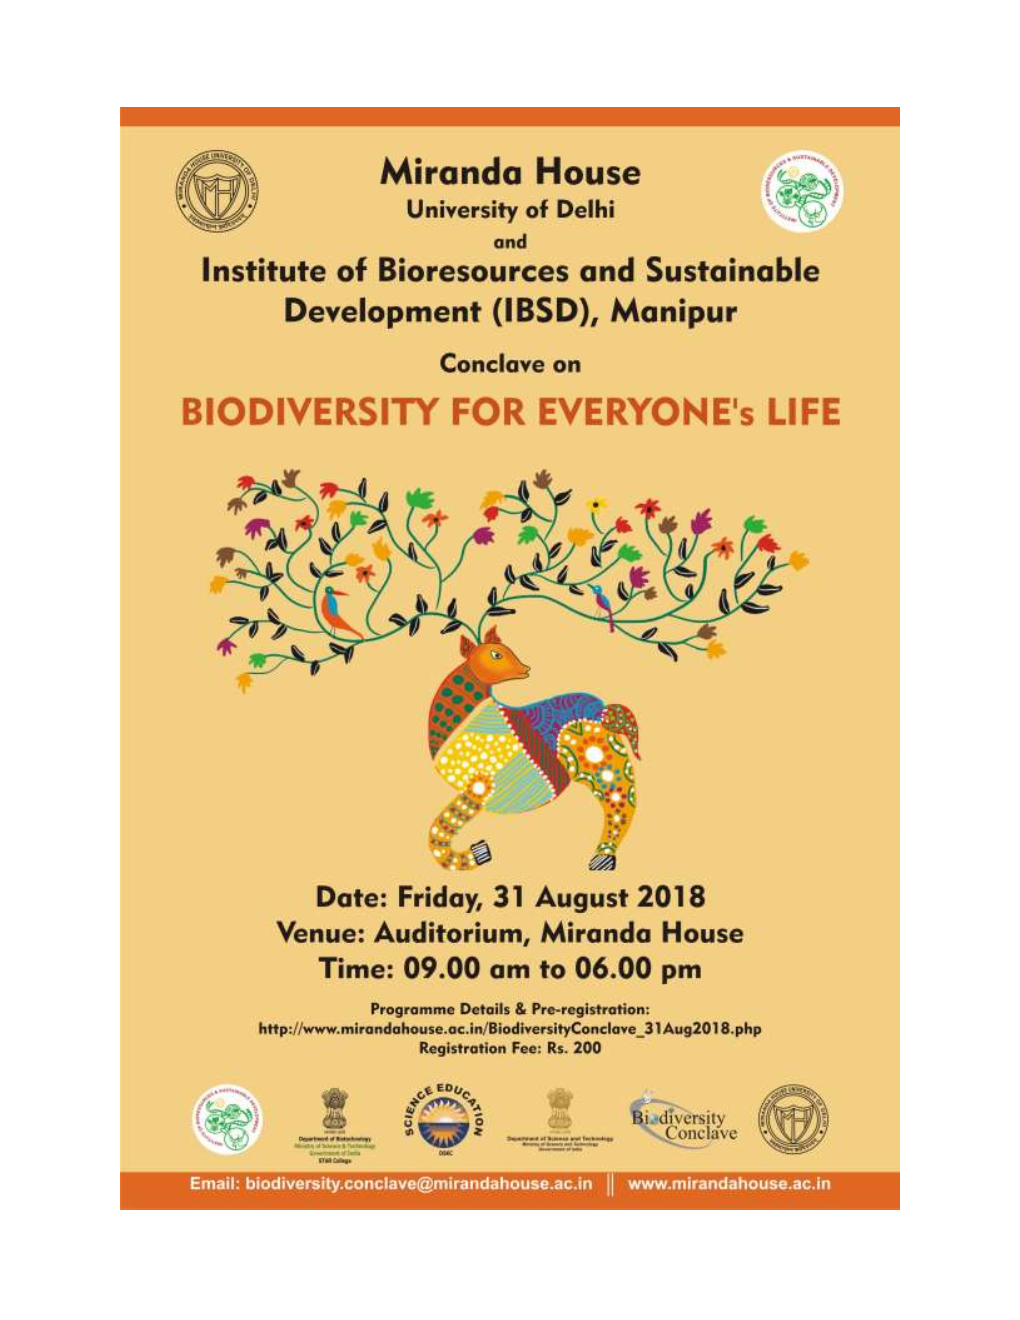 Biodiversity for Every One's Life